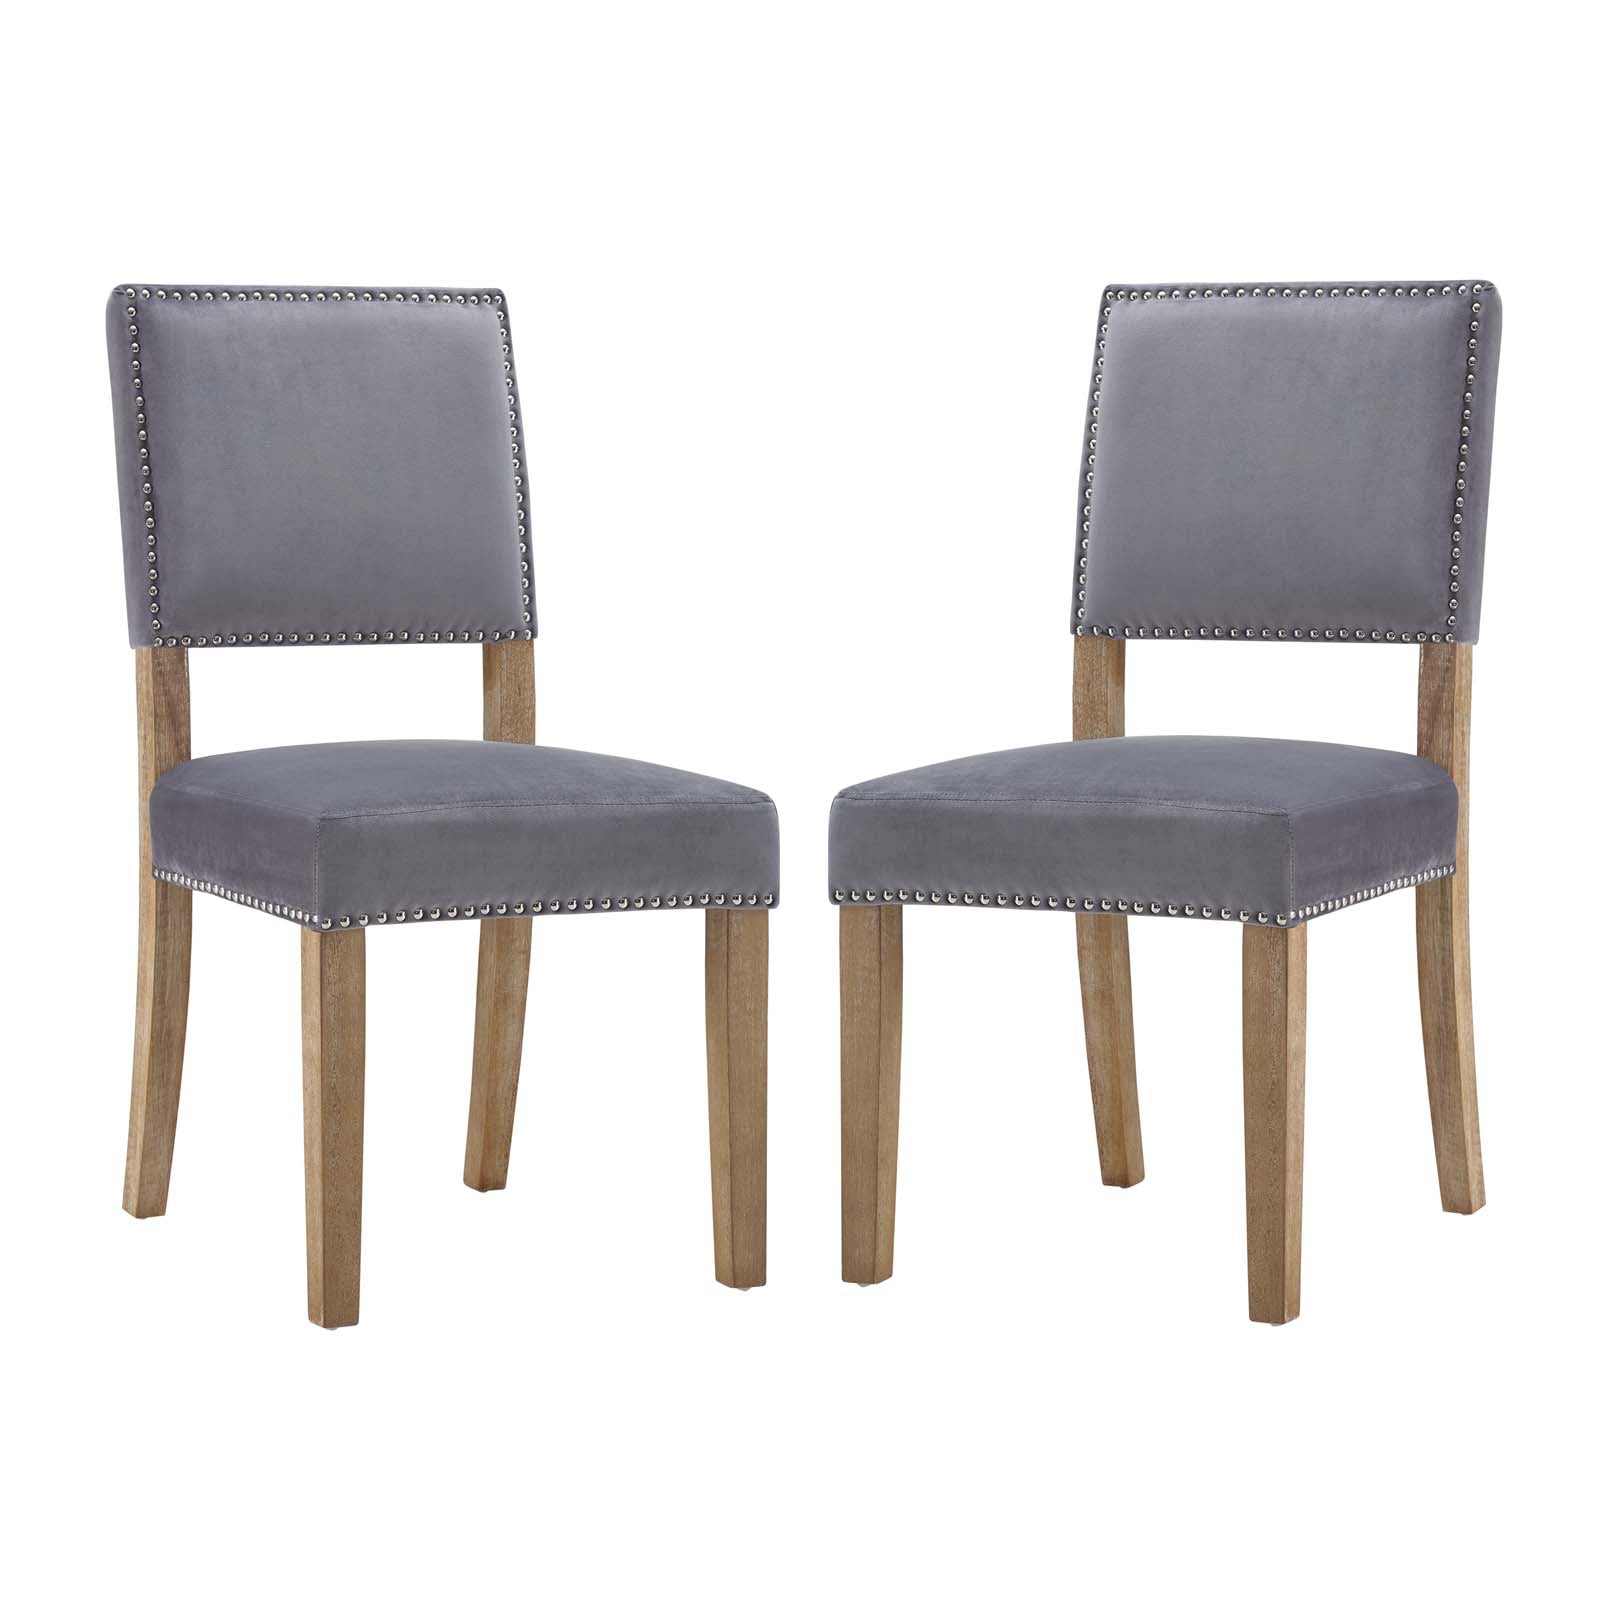 Modway Dining Chairs - Oblige Dining Chair Wood Gray ( Set of 2 )